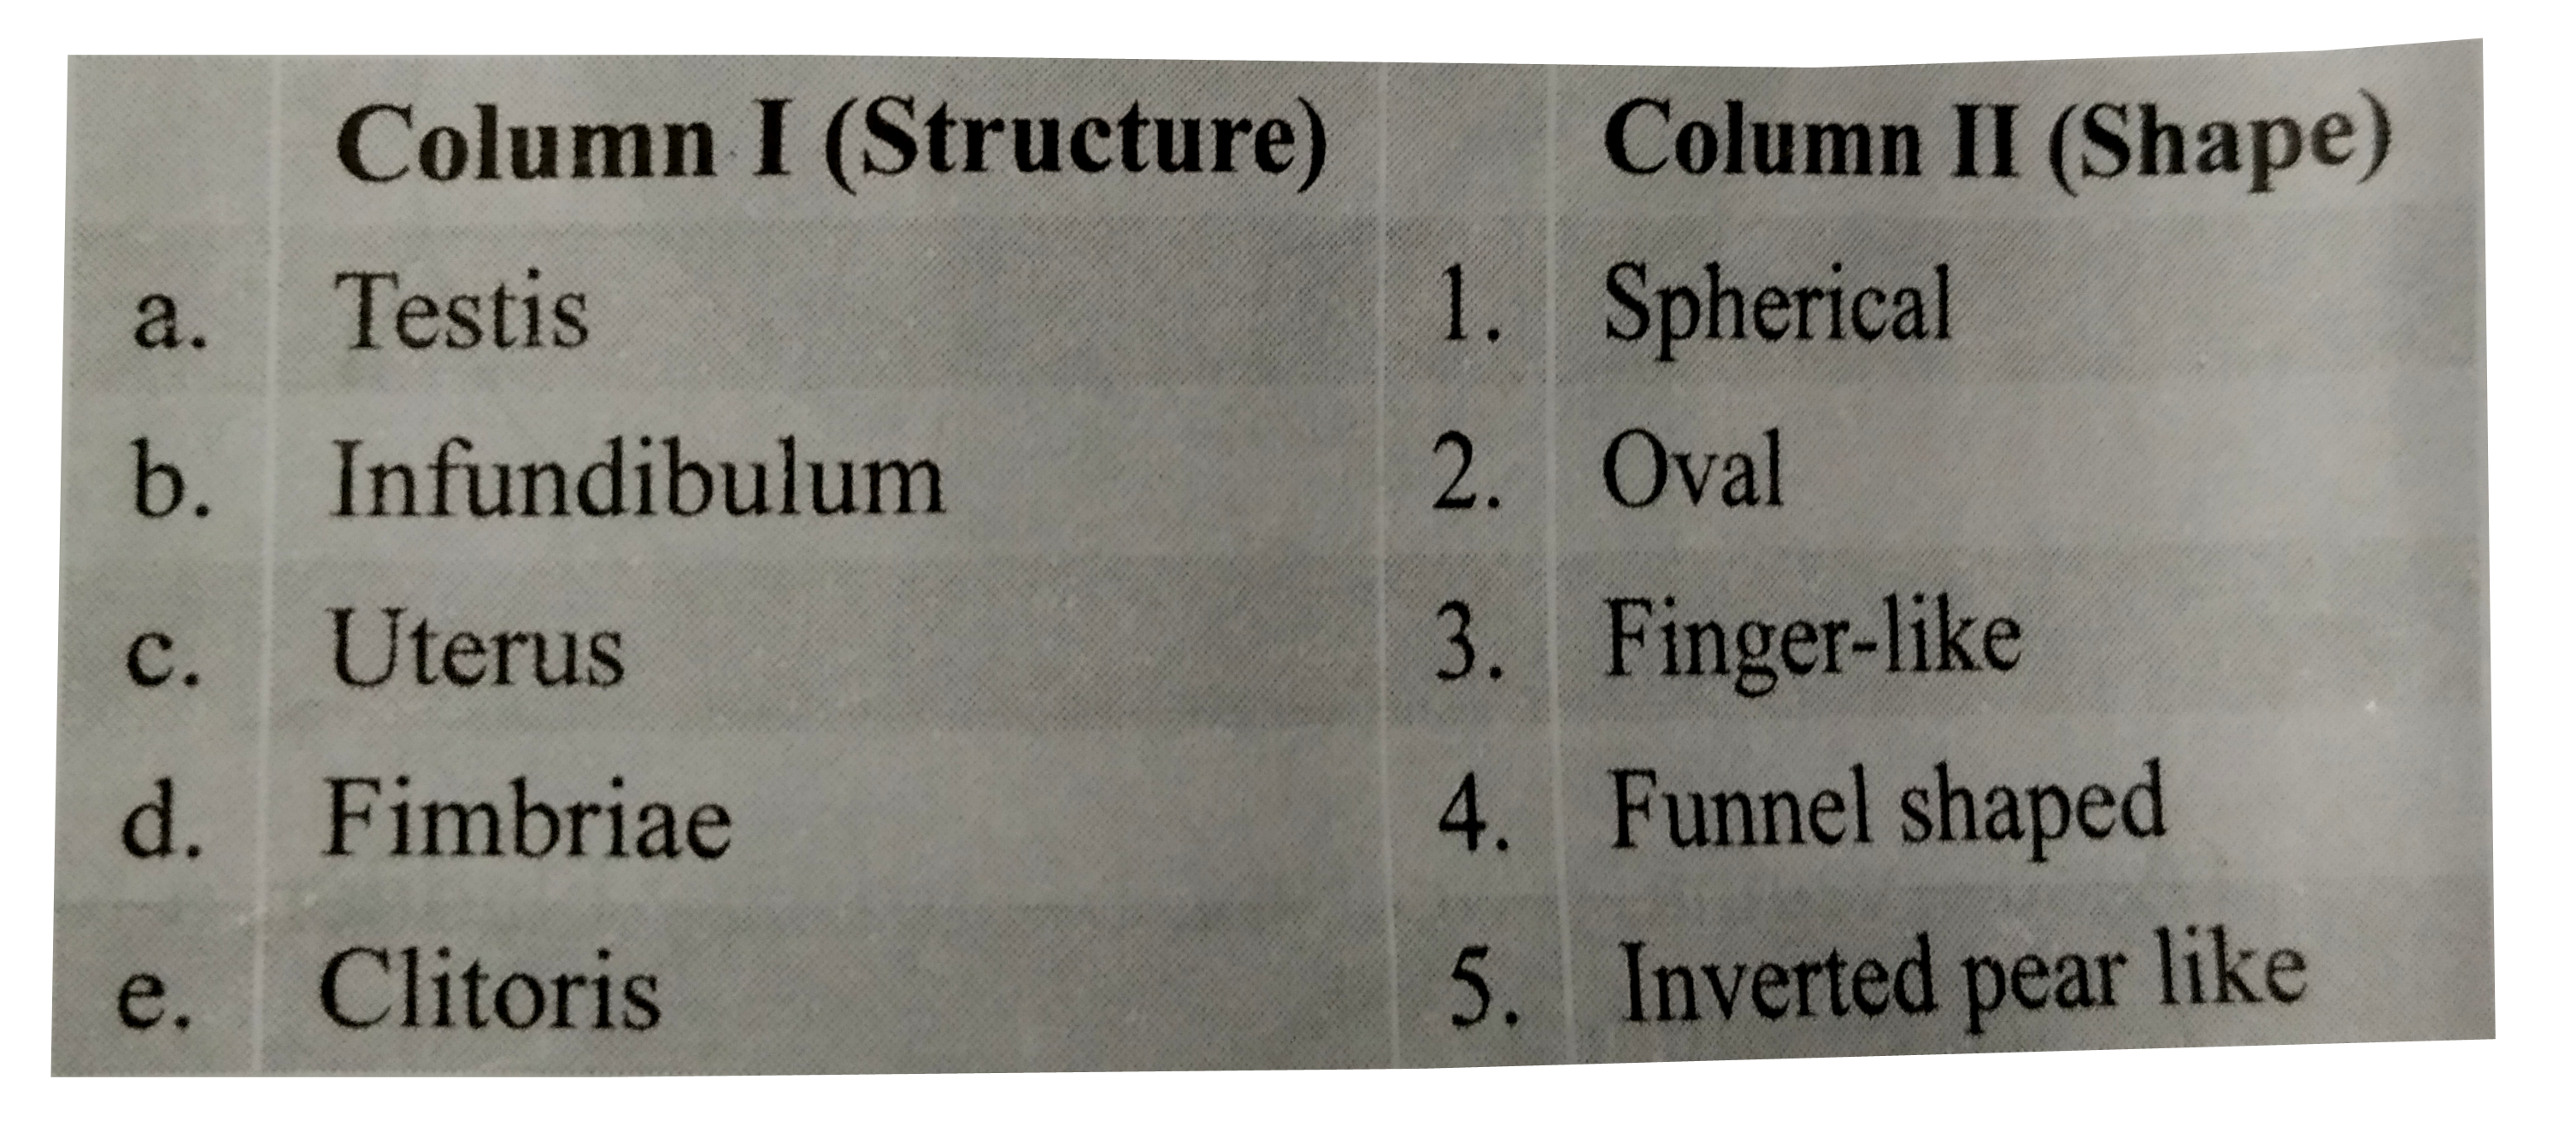 Match the columns I and II, and choose the correct combination from the options given.